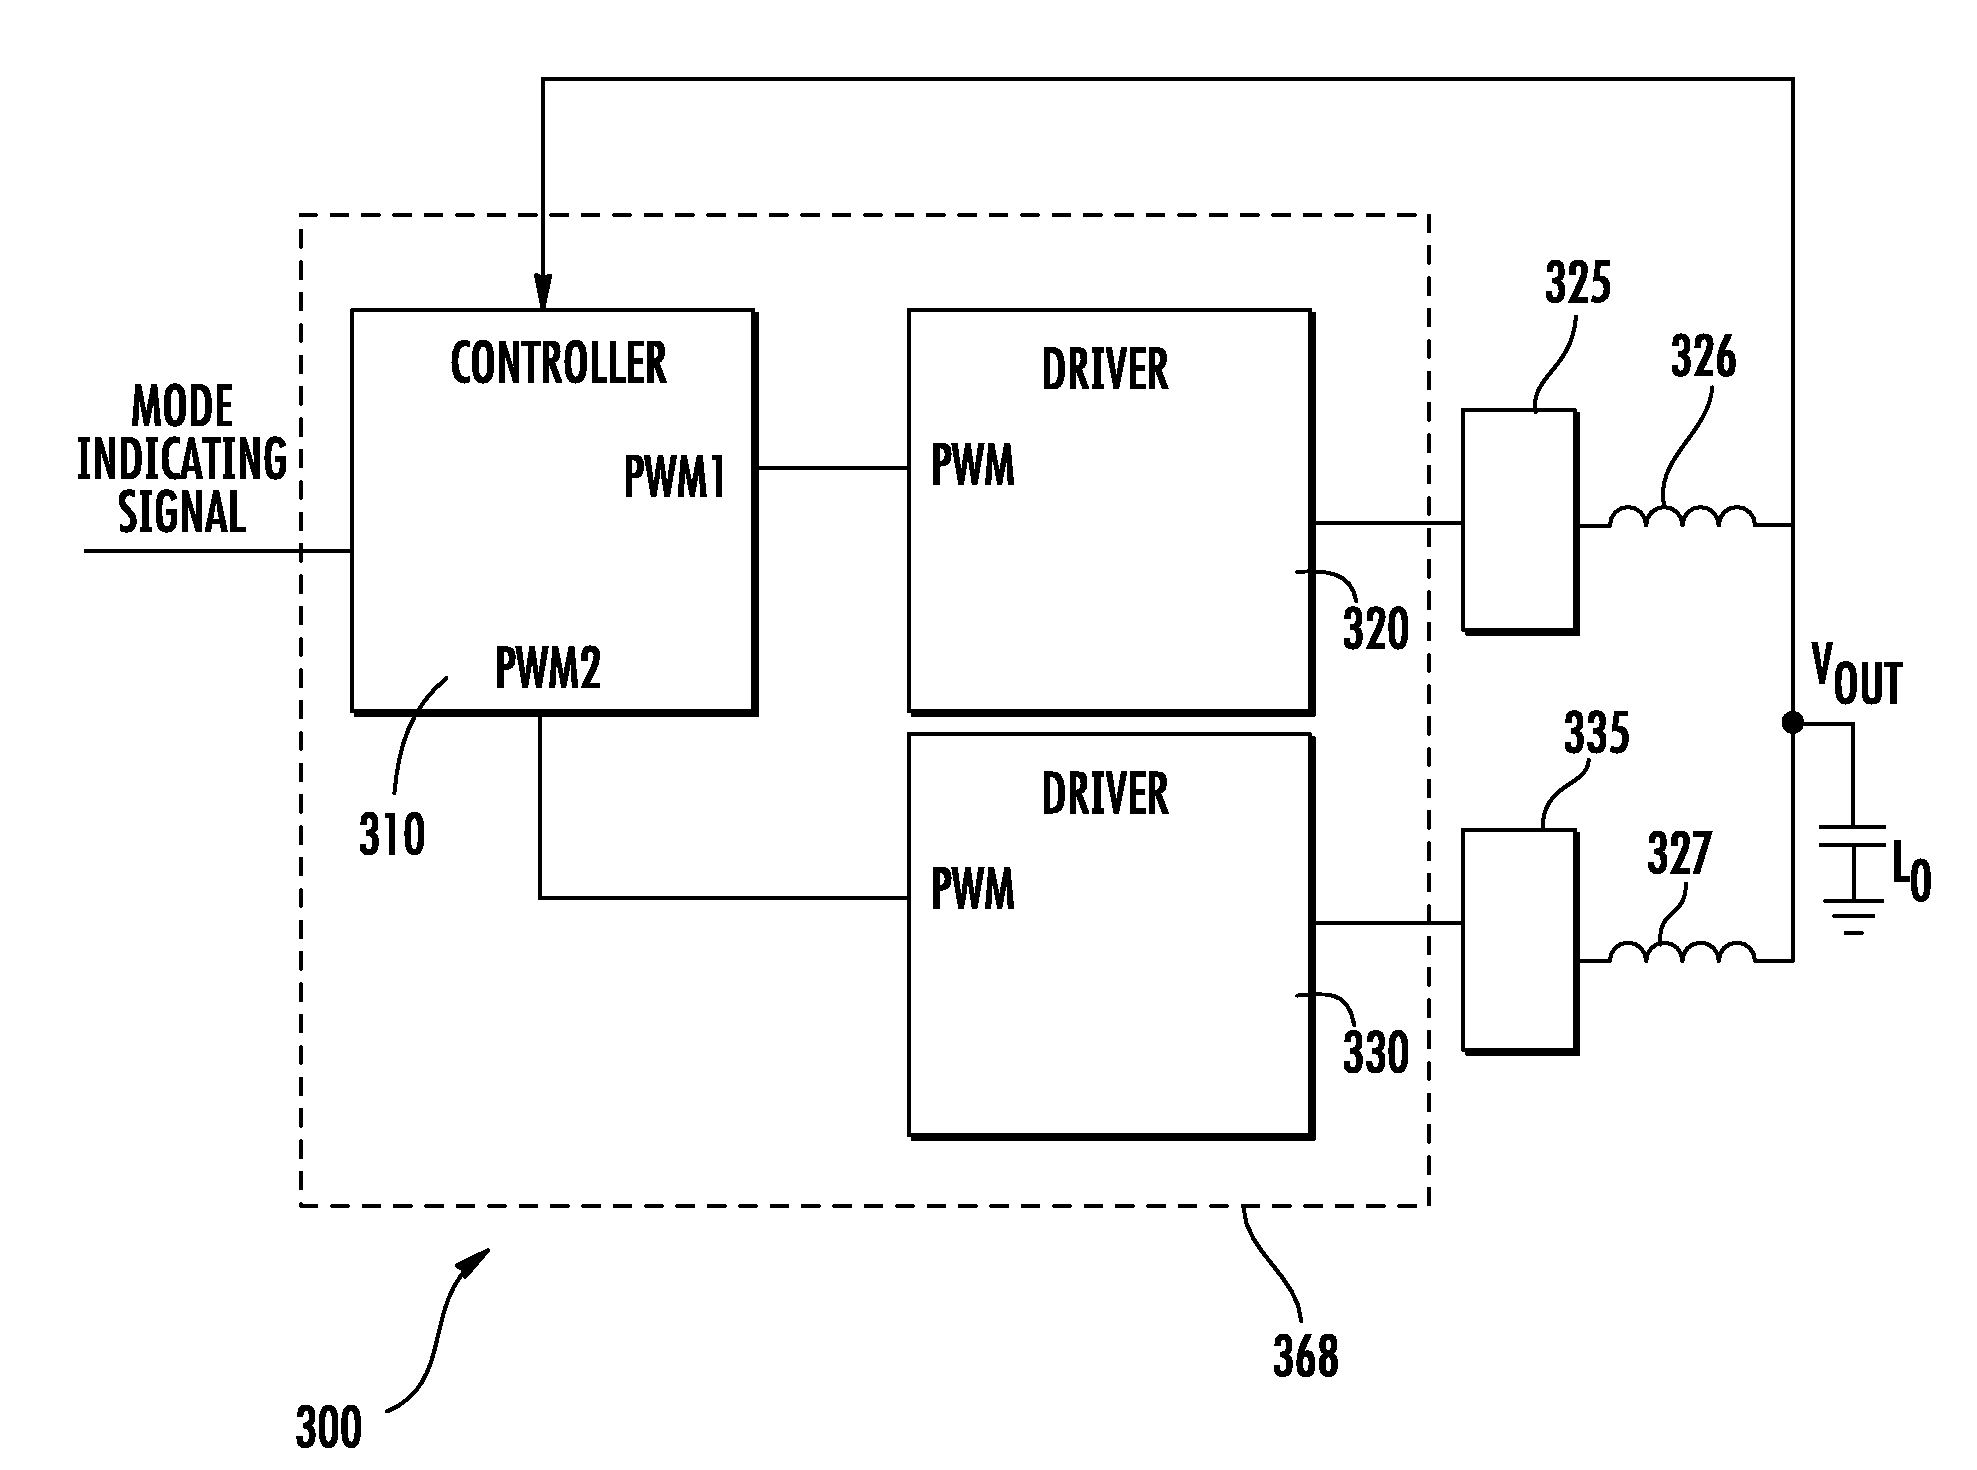 Controller and driver communication for switching regulators